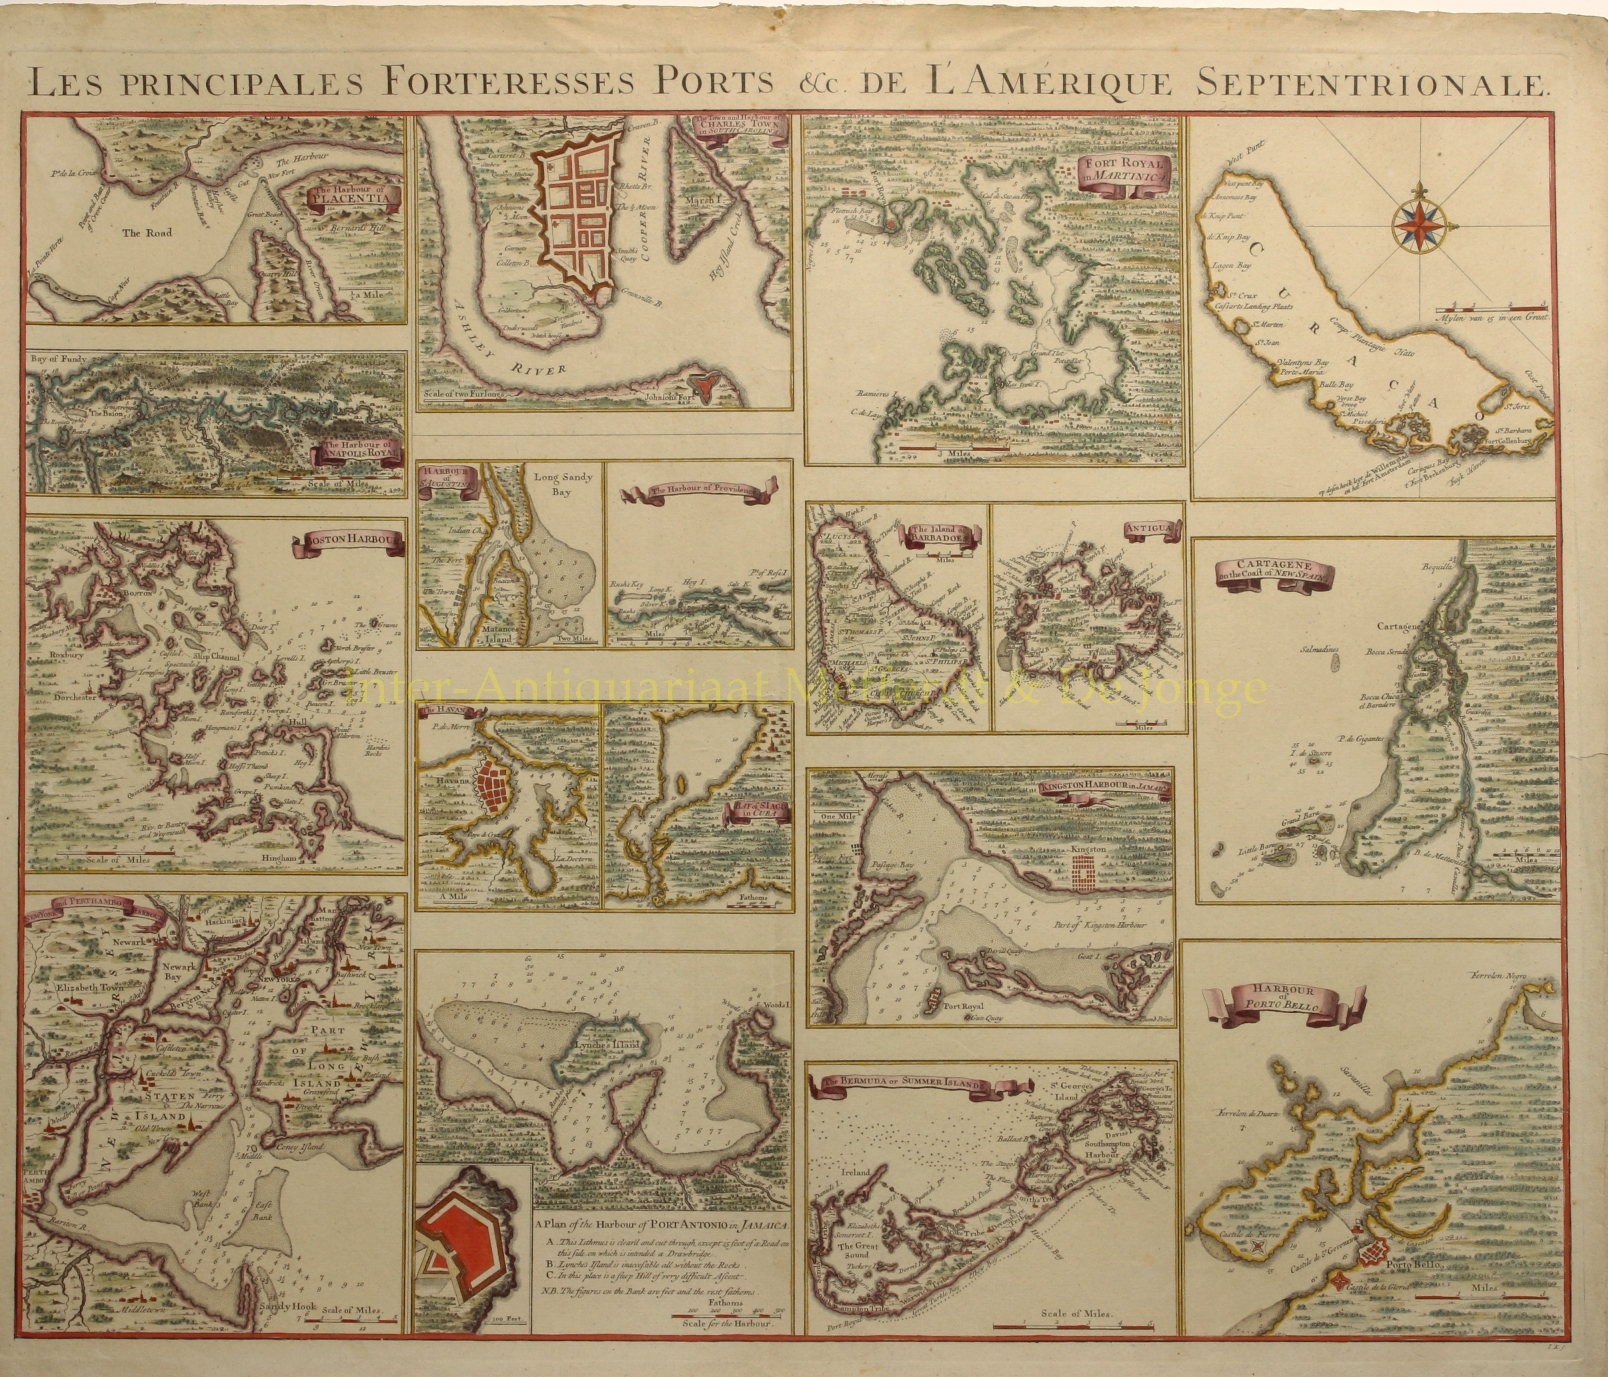 Covens & Mortier - American ports, West-Indies - Covens & Mortier, c. 1740